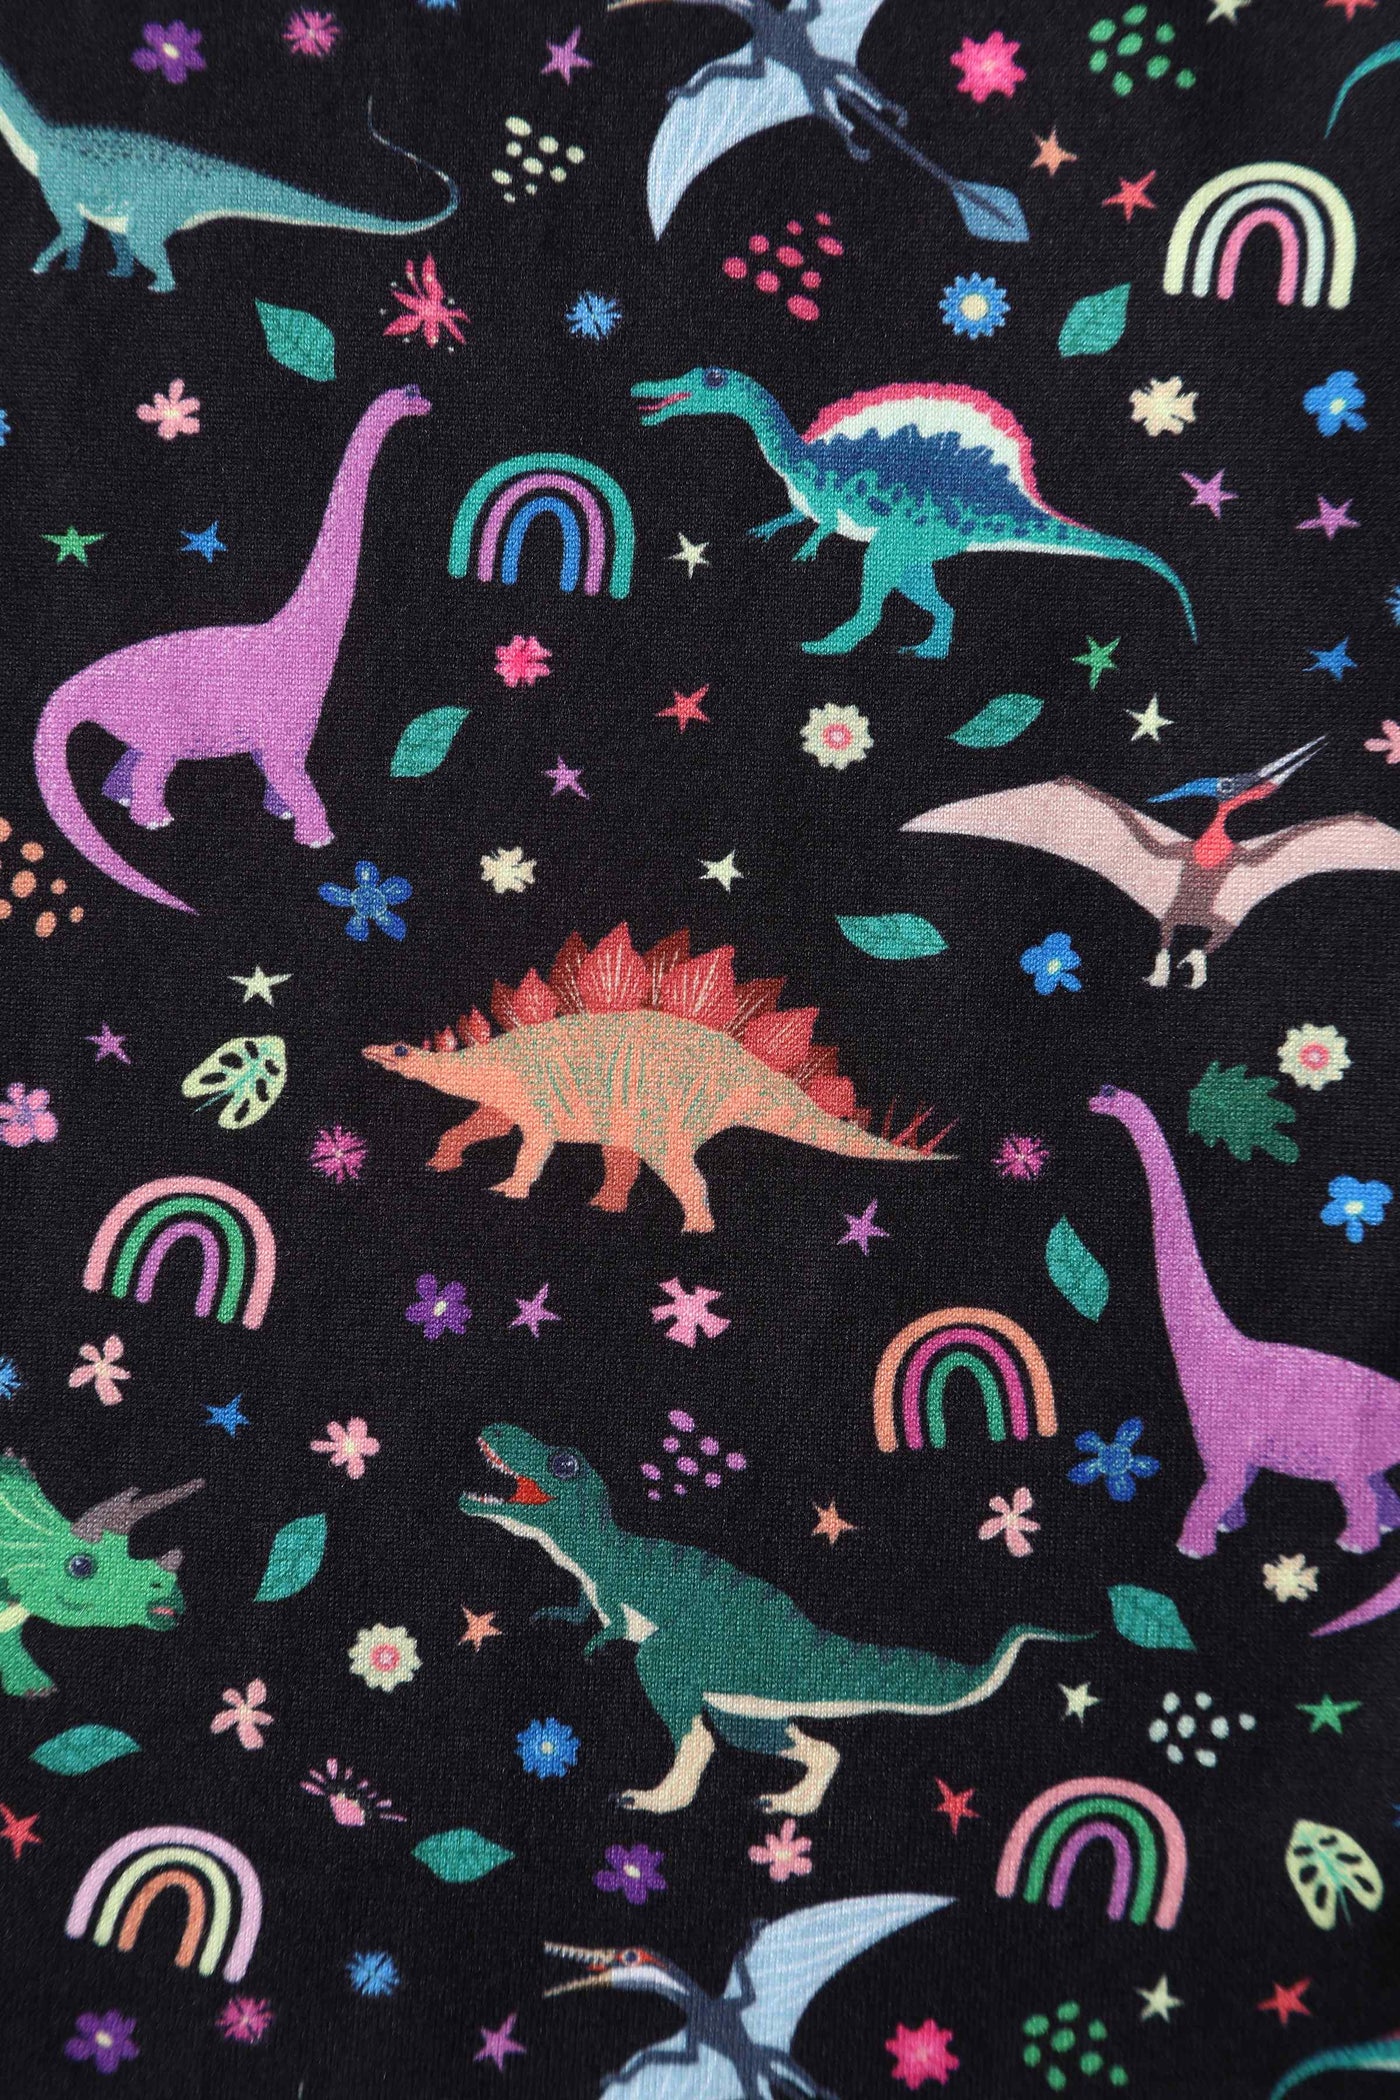 Close up View of Dinosaur and Rainbow Long Sleeved Dress